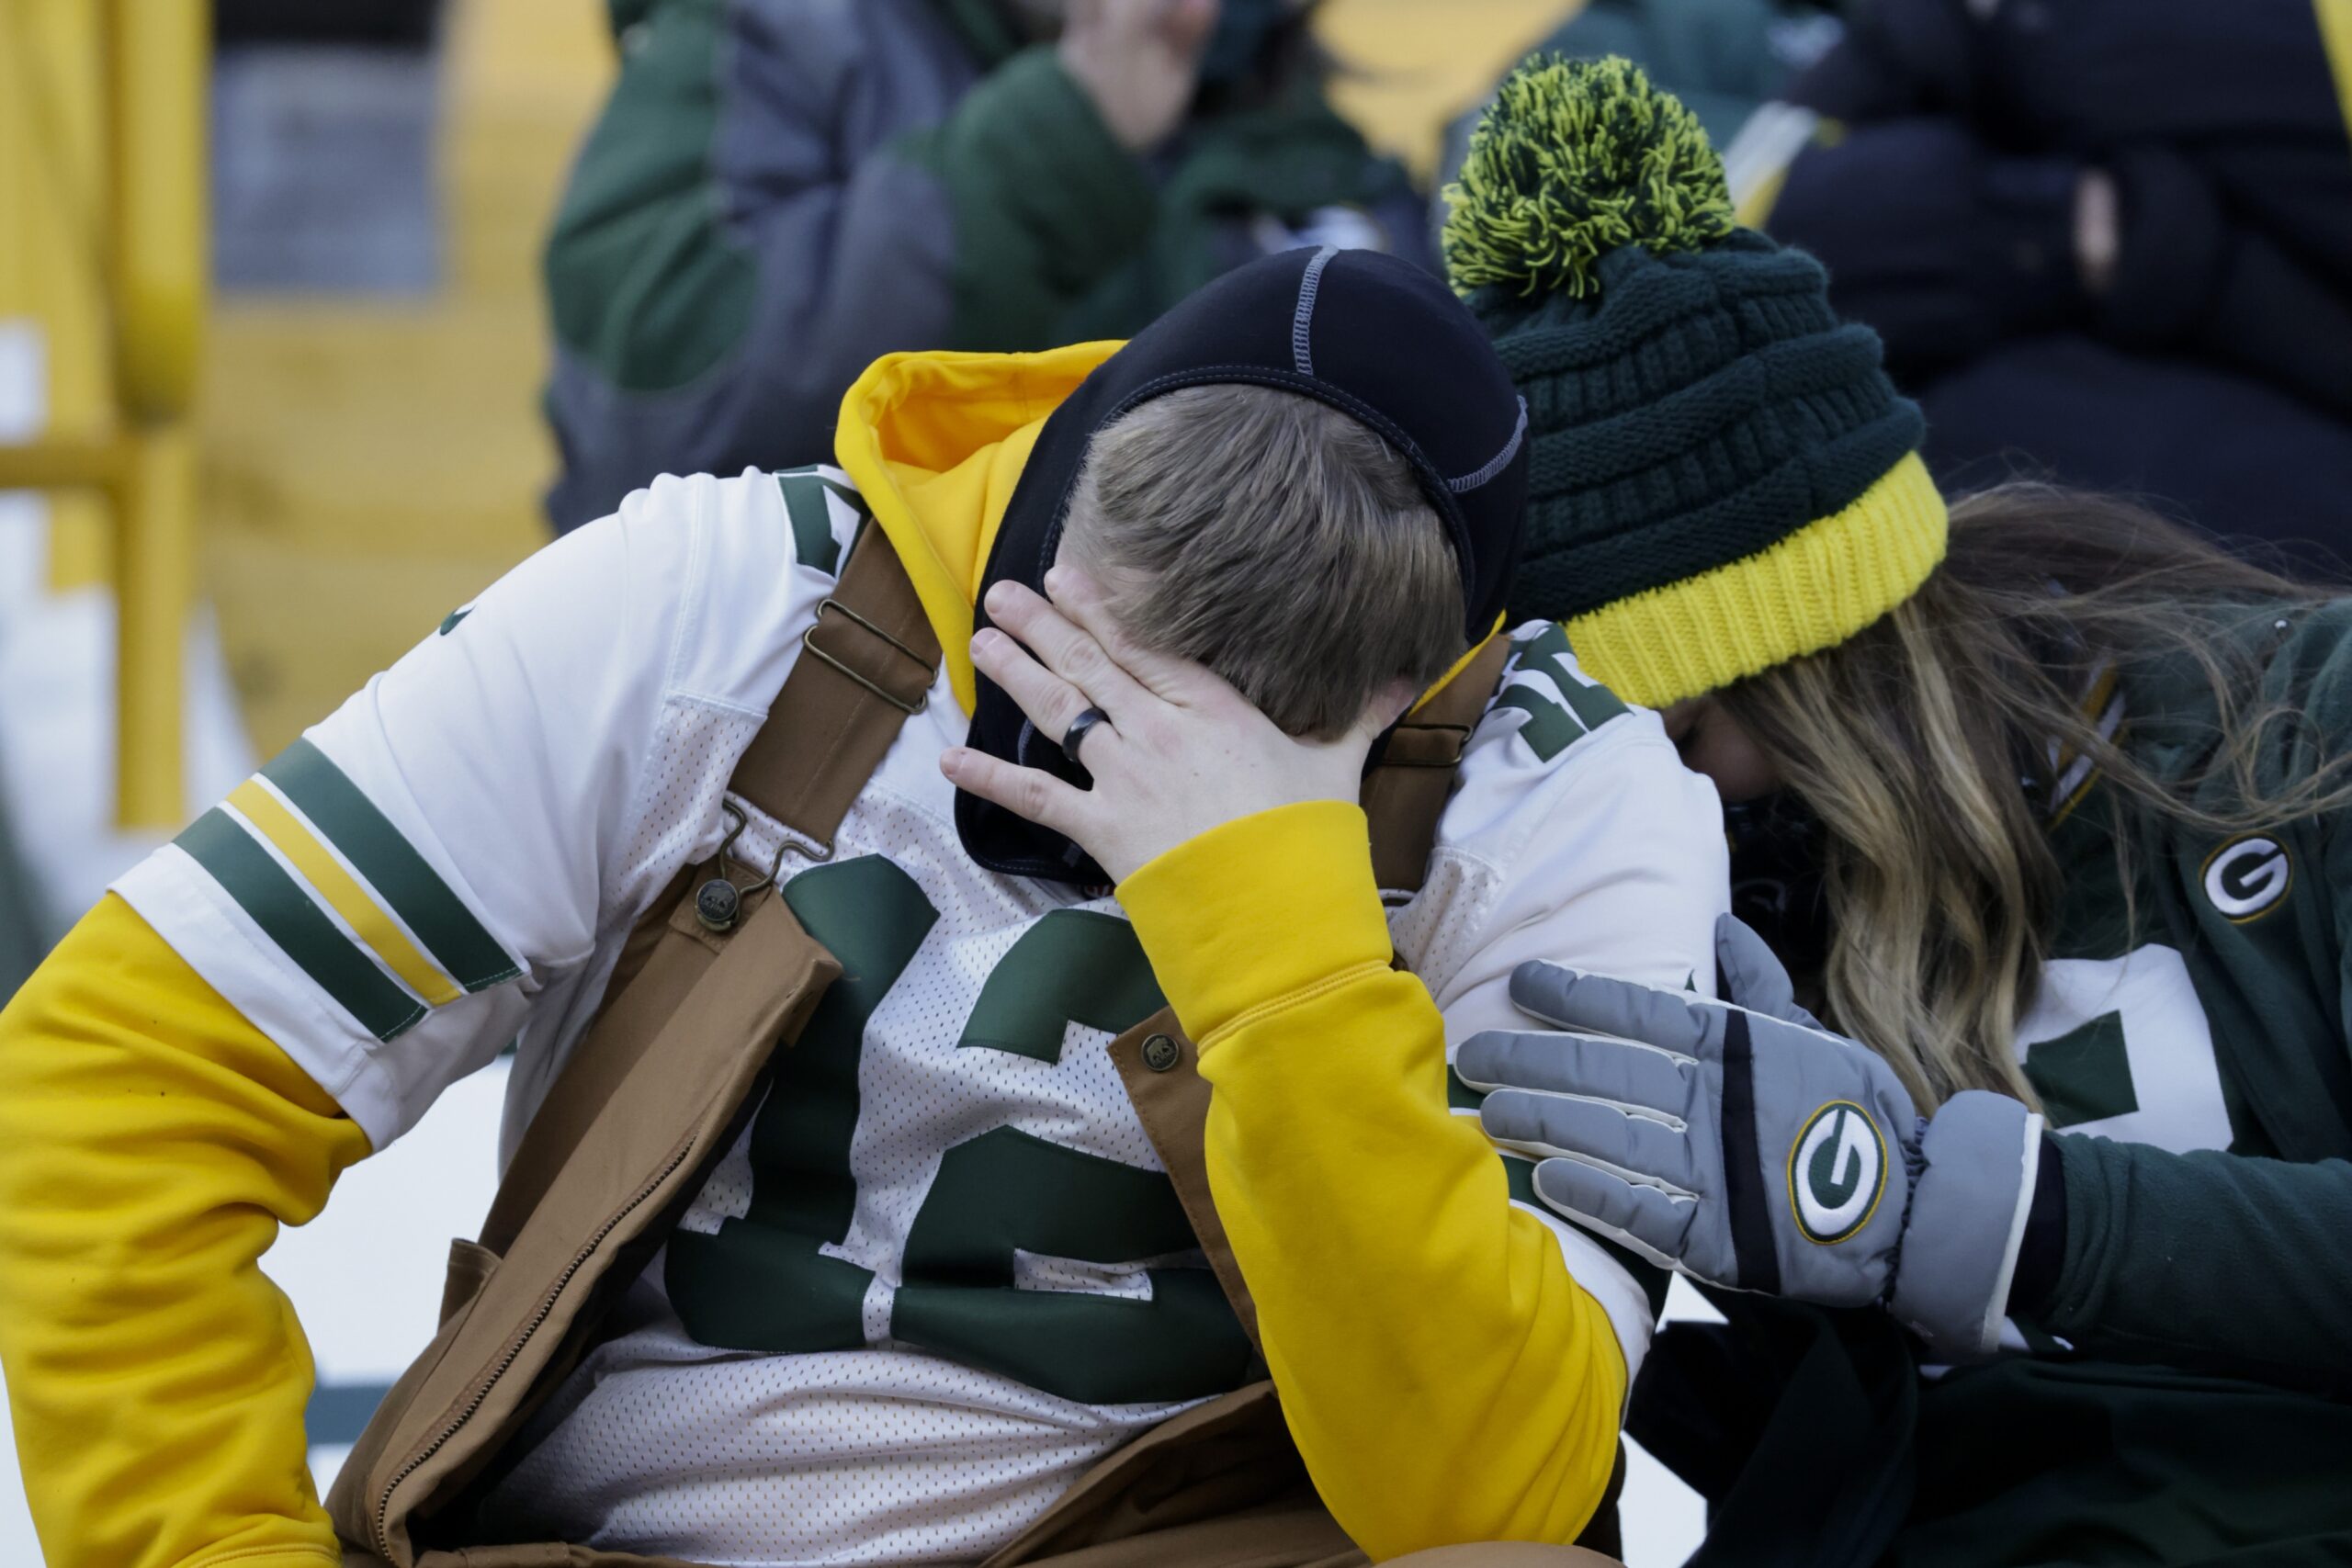 Packer fans at the game between the Tampa Bay Buccaneers and Green Bay Packers